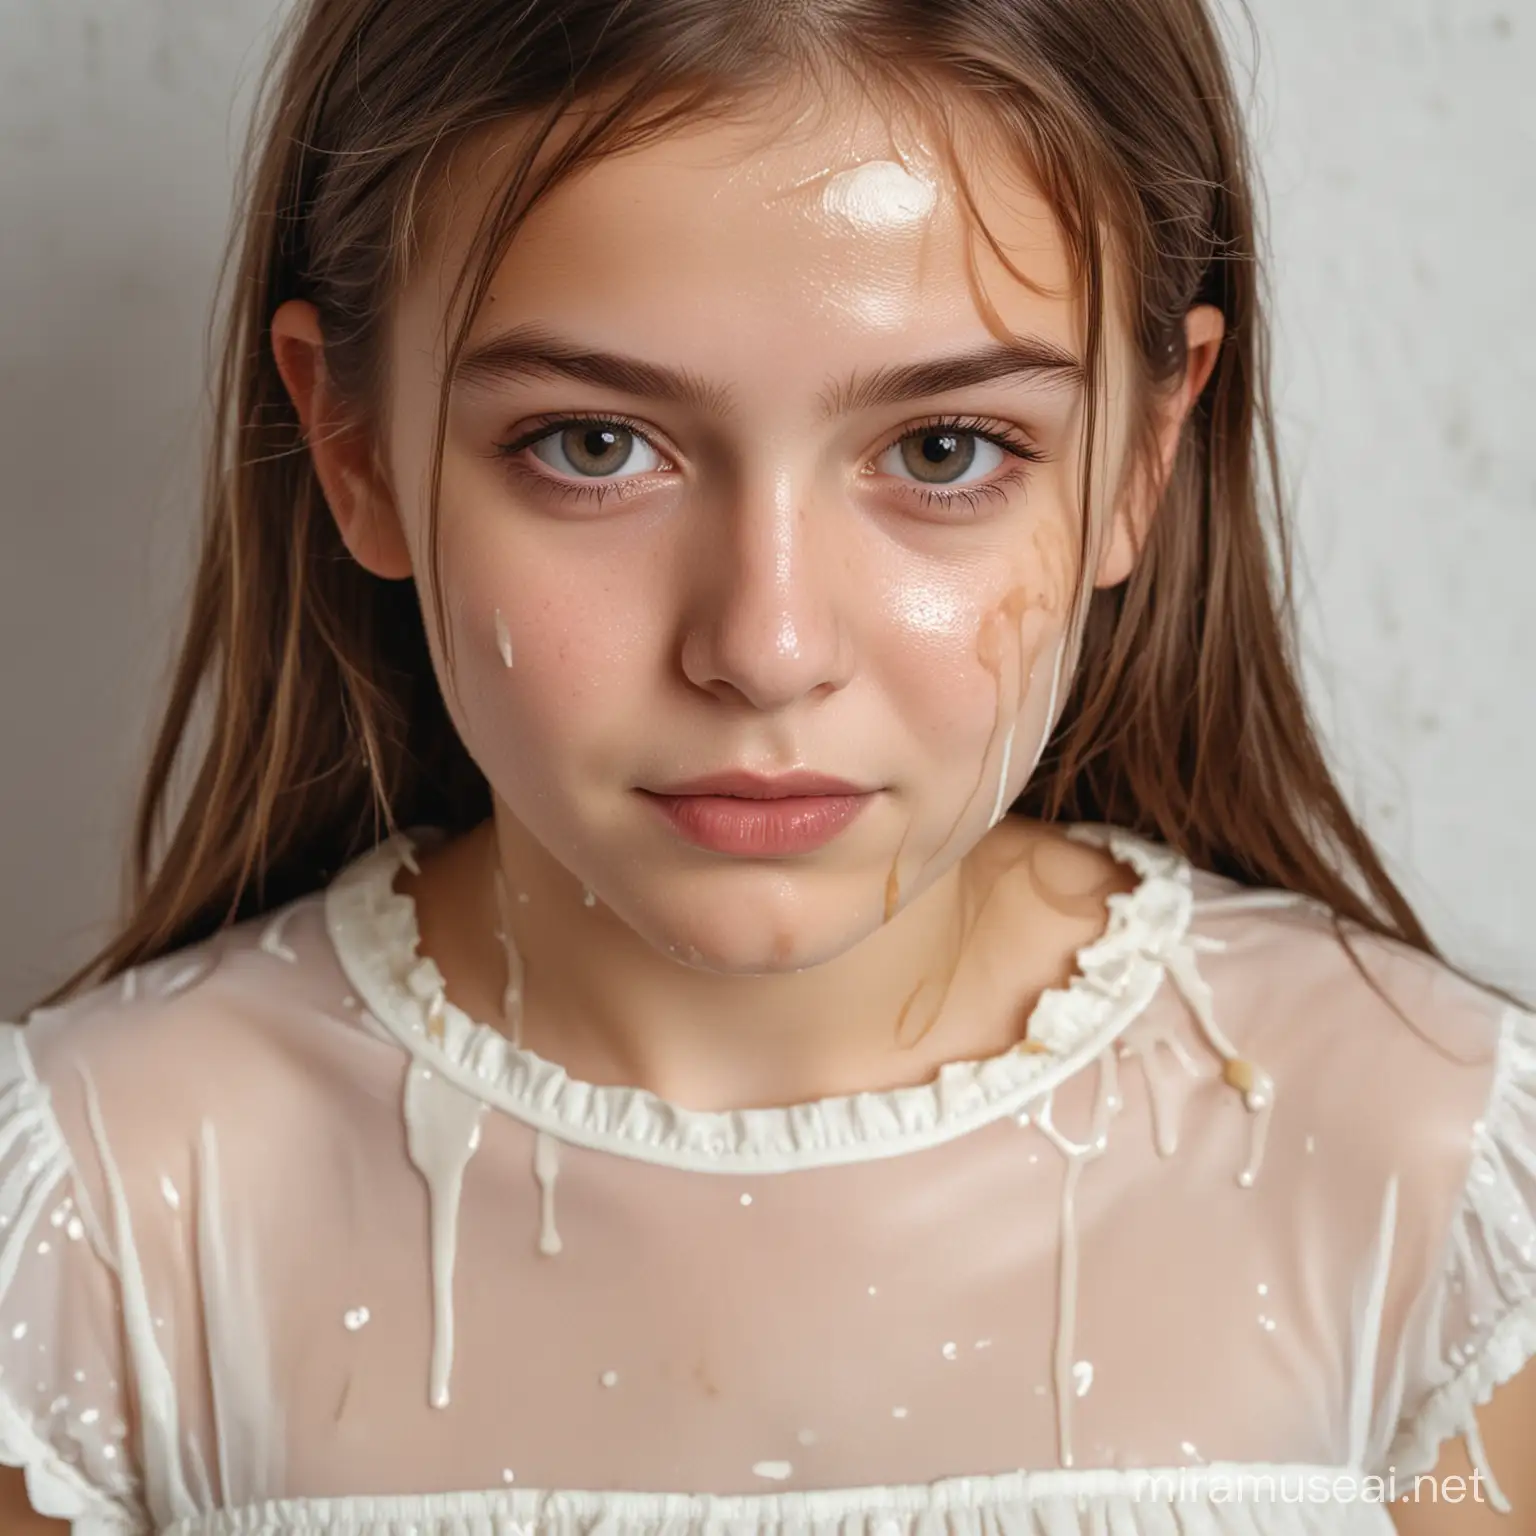 Closeup of a girl wearing dress, her face stained with sticky milk